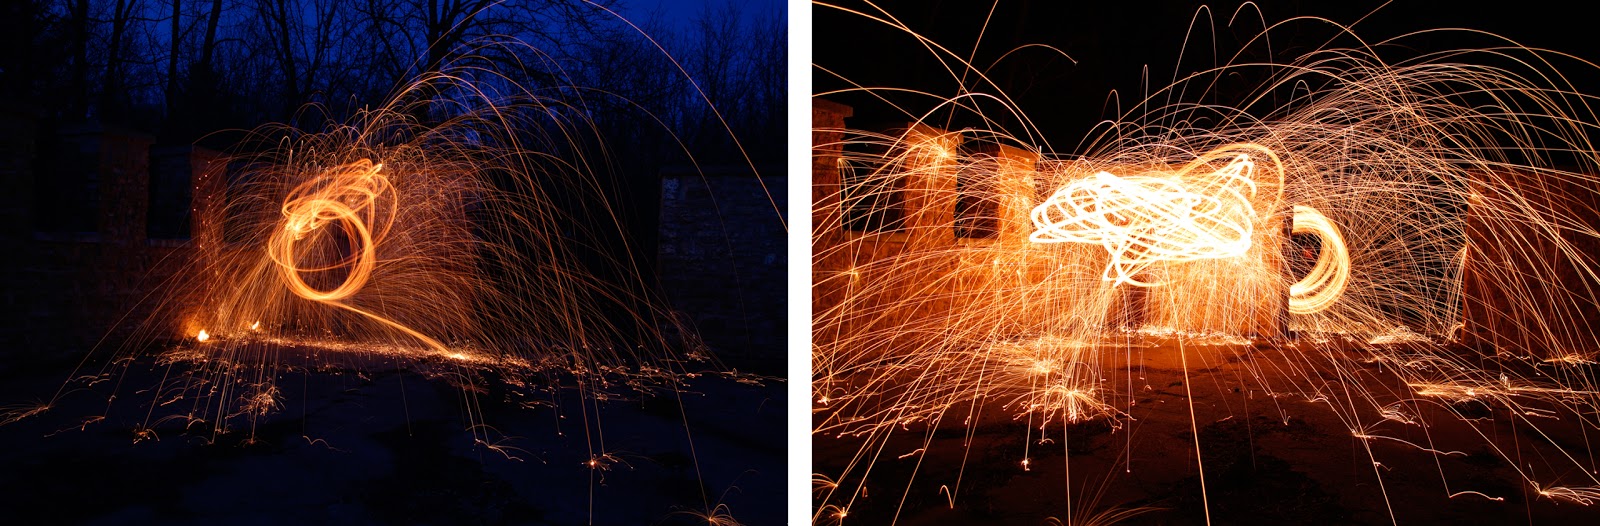 steel wool photography, photography, steel wool, spinning fire, how to, long exposure photography, night photography